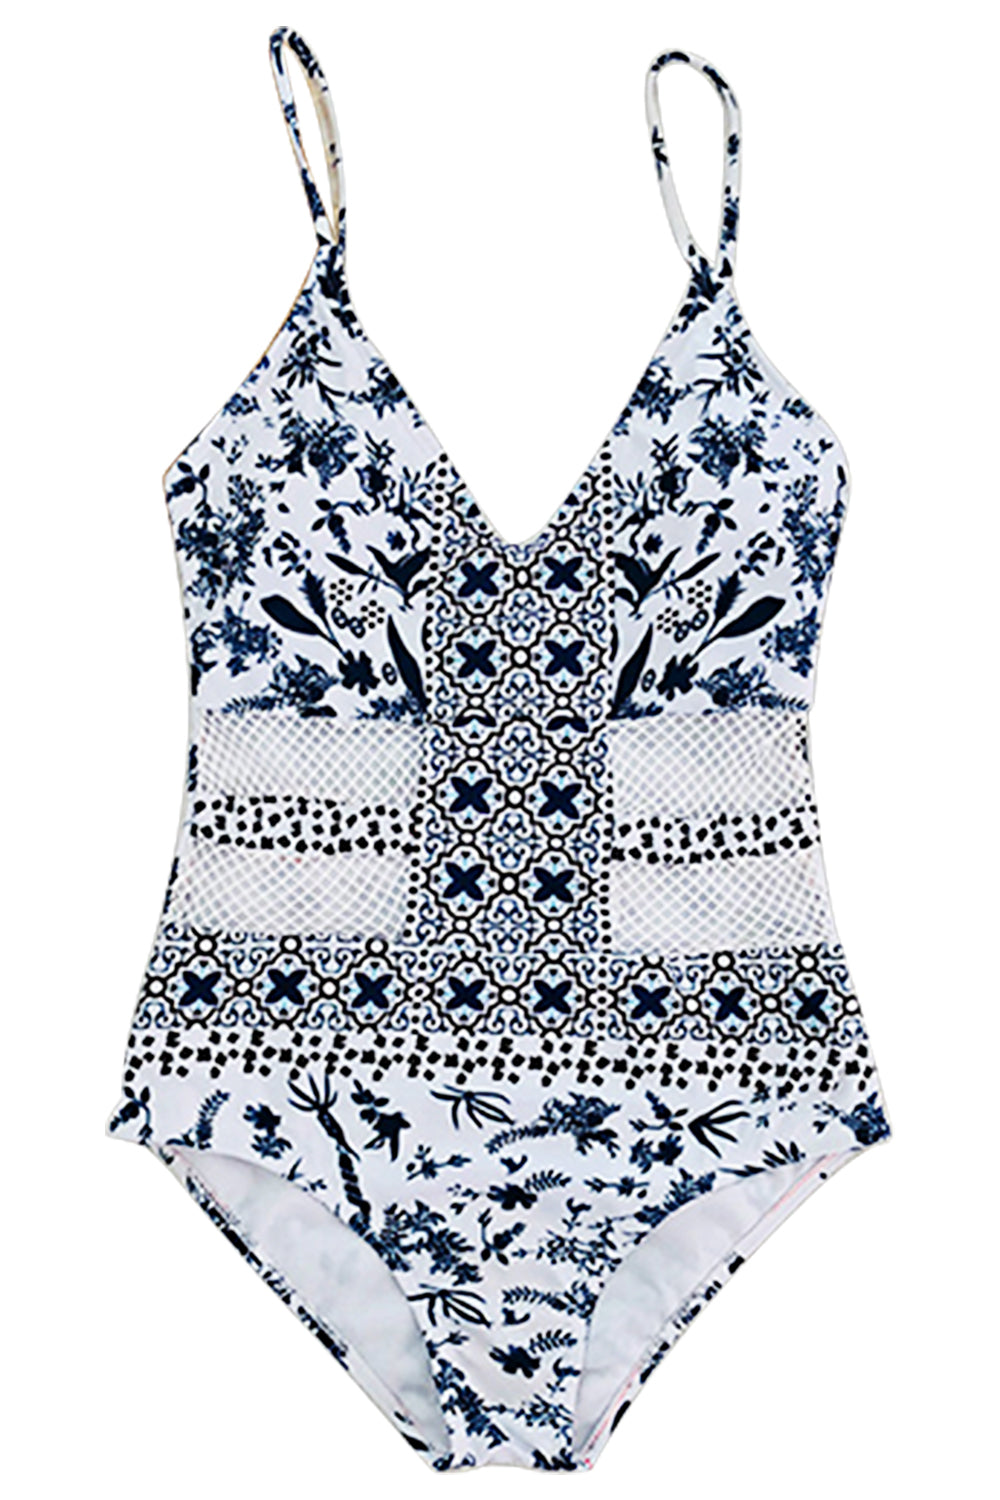 Iyasson Blue Floral Printing Splicing One-piece Swimsuit